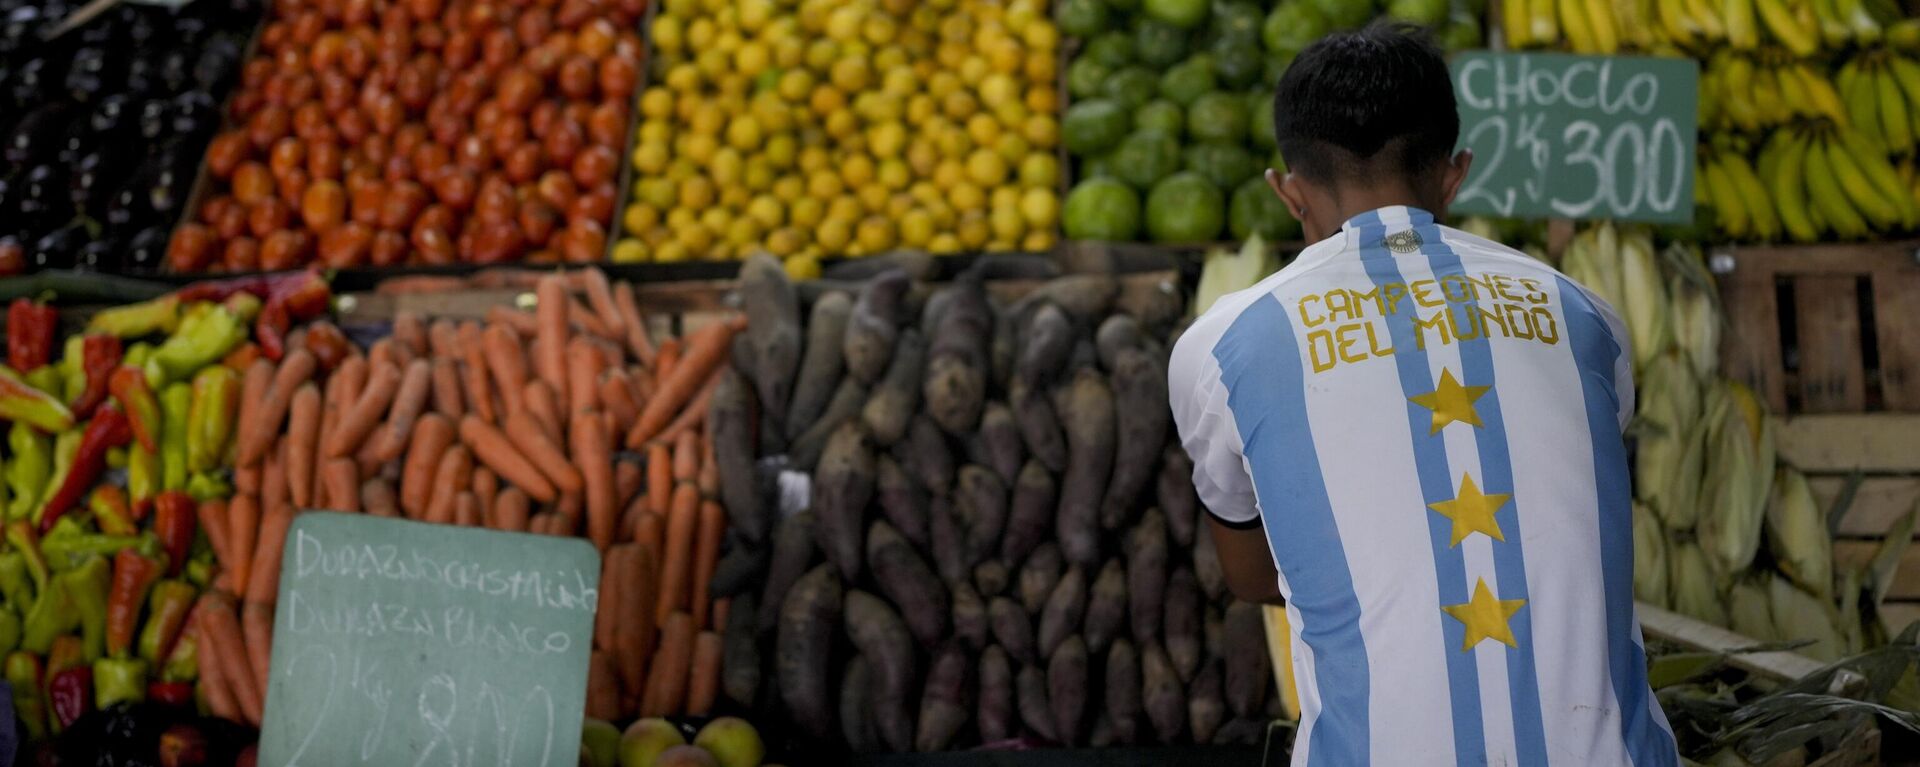 A worker wearing an Argentine soccer jersey that says in Spanish World Champions, referring to Argentina's 2022 World Cup title, arranges vegetables at the central market in Buenos Aires, Argentina, Monday, Feb. 13, 2023. On Feb. 14, the government statistics service (INDEC) will release January's Consumer Price Index for Argentina, which has one of the world's highest inflation rates. - Sputnik Africa, 1920, 25.08.2023